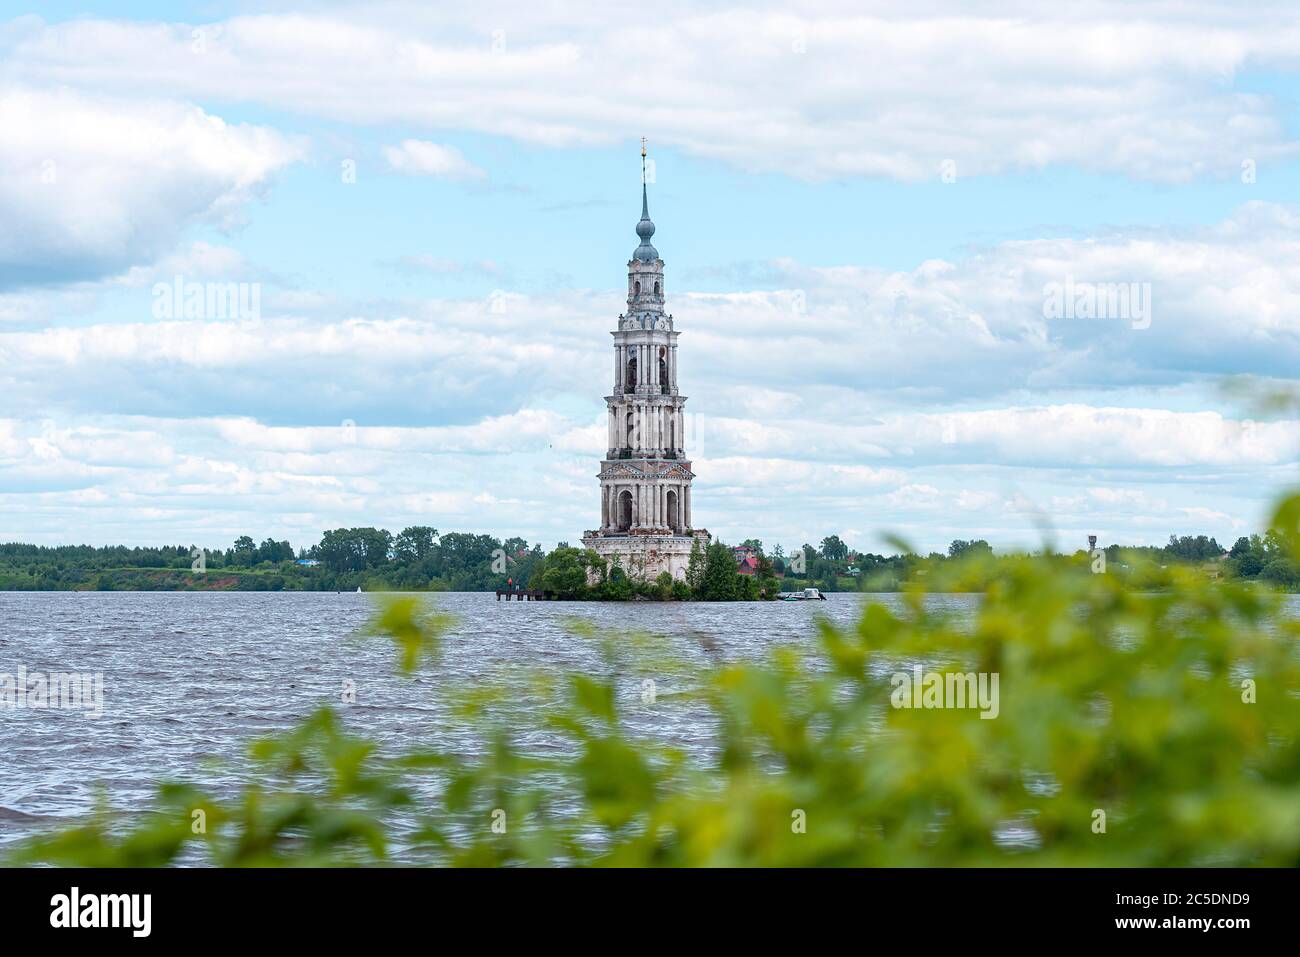 Kalyazin flooded Belfry or bell tower over Volga river is a part of the flooded old church in old Russian town Kalyazin in Russia Stock Photo